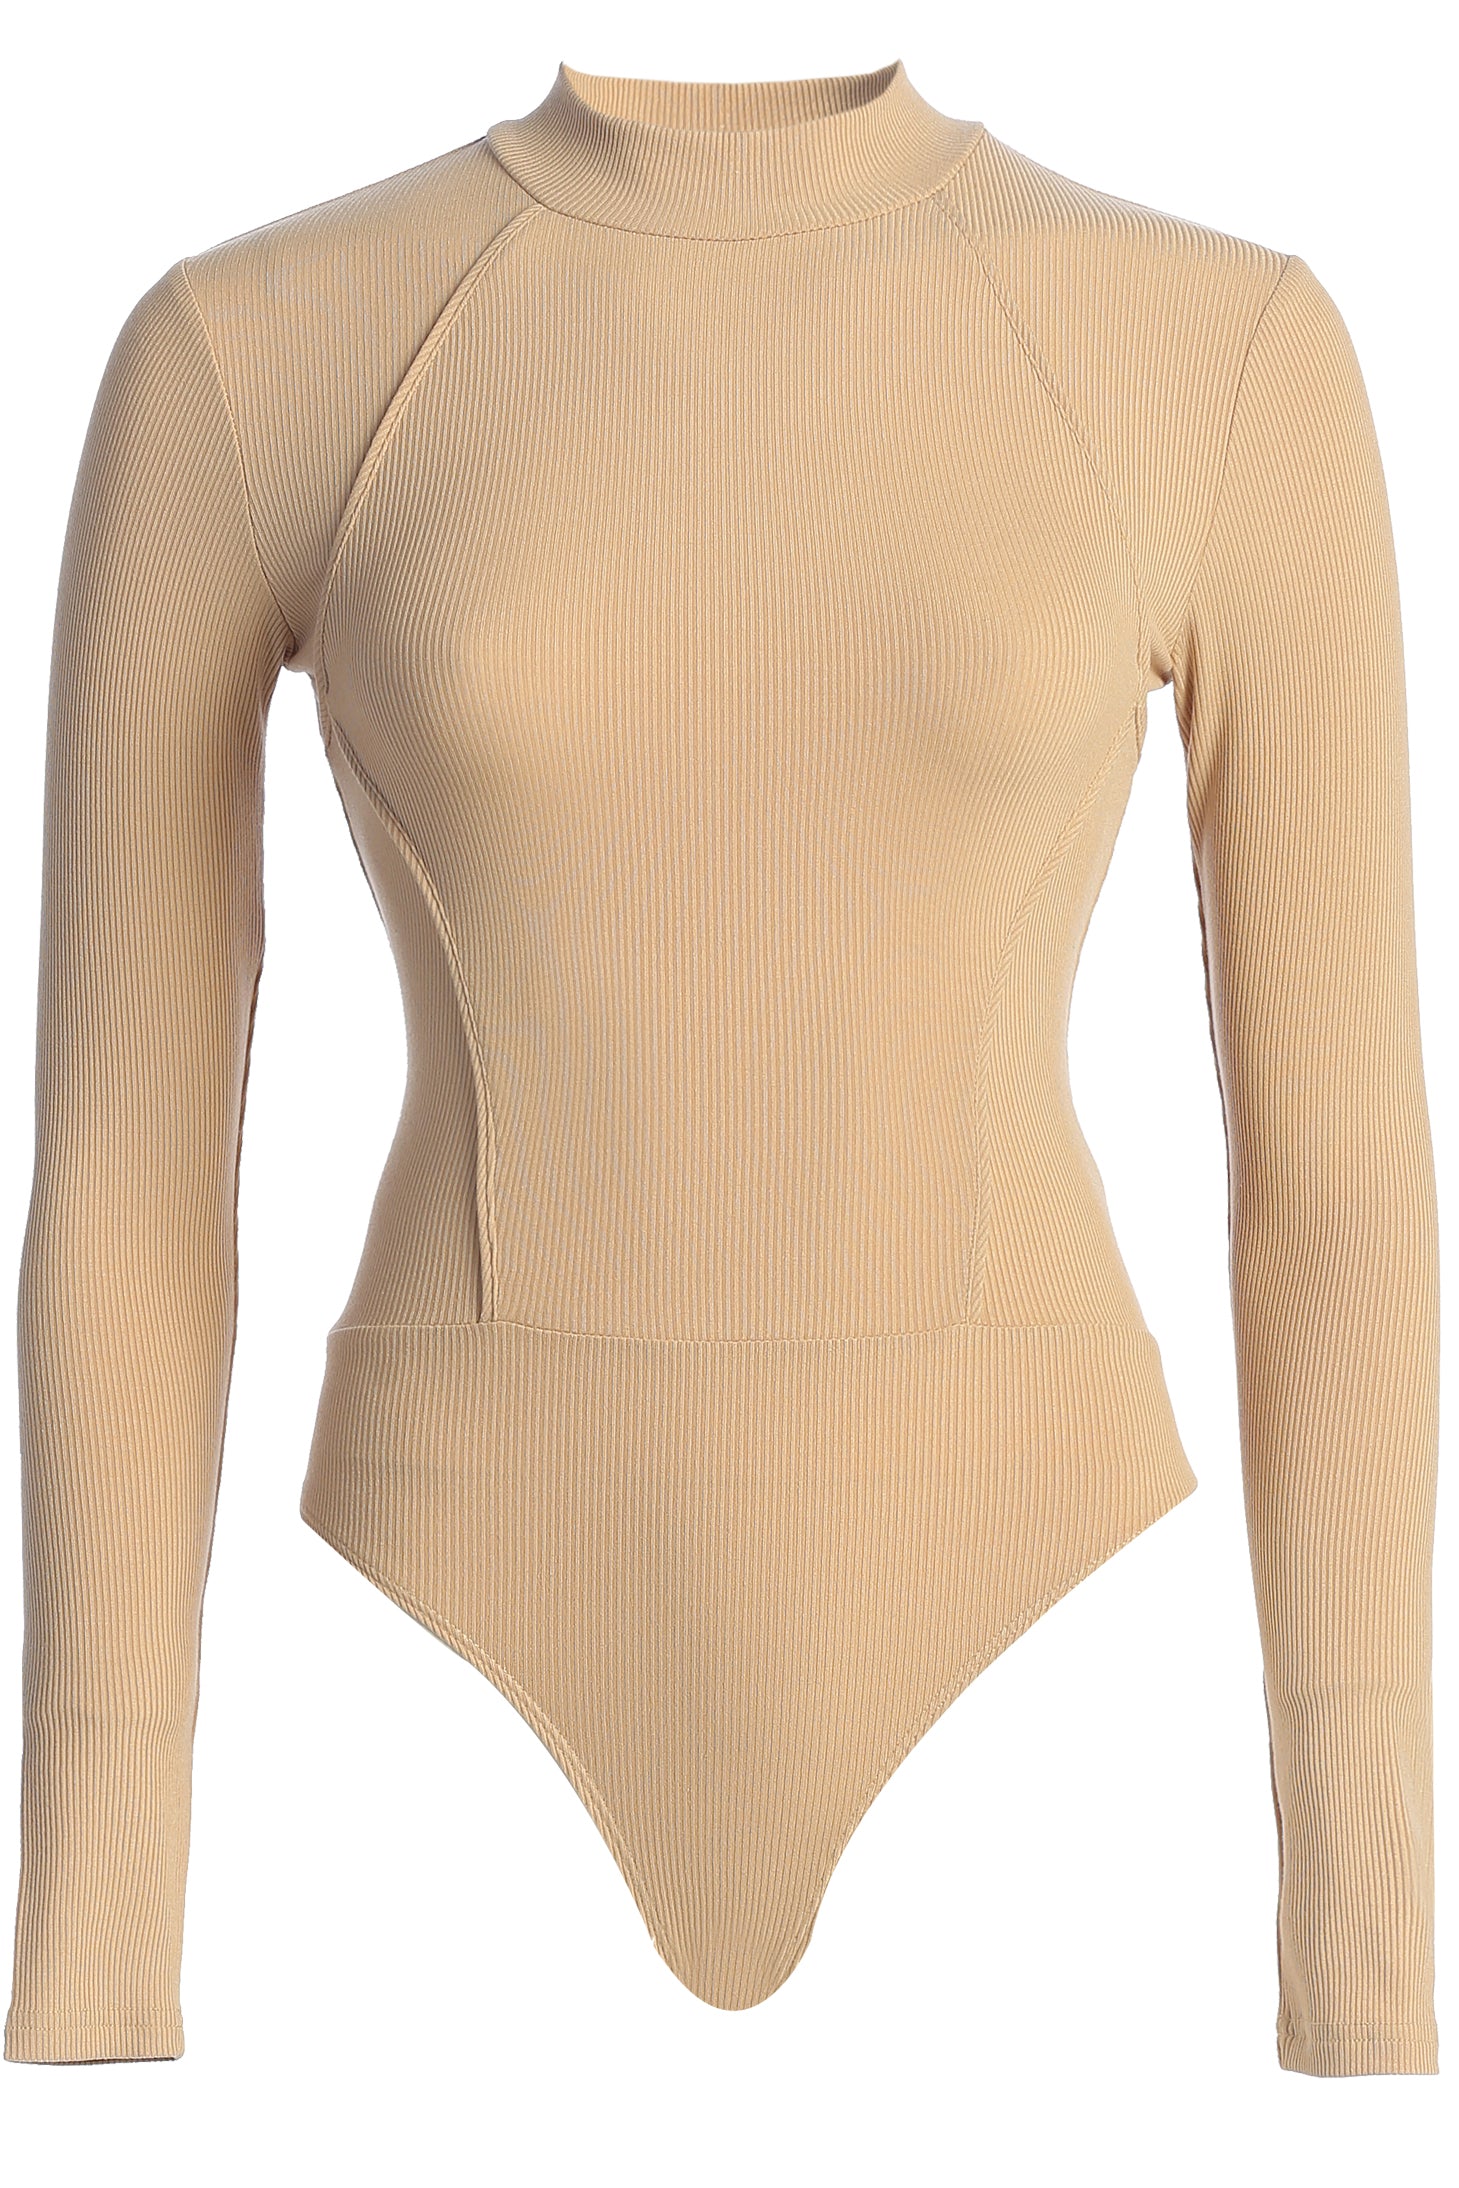 lunhaifi Seamless Elastic Thermal Inner Wear, Women's Ultra-Thin Seamless  Body Slimming Athletic Base Layers (Beige,L:40-65kg) : :  Clothing, Shoes & Accessories